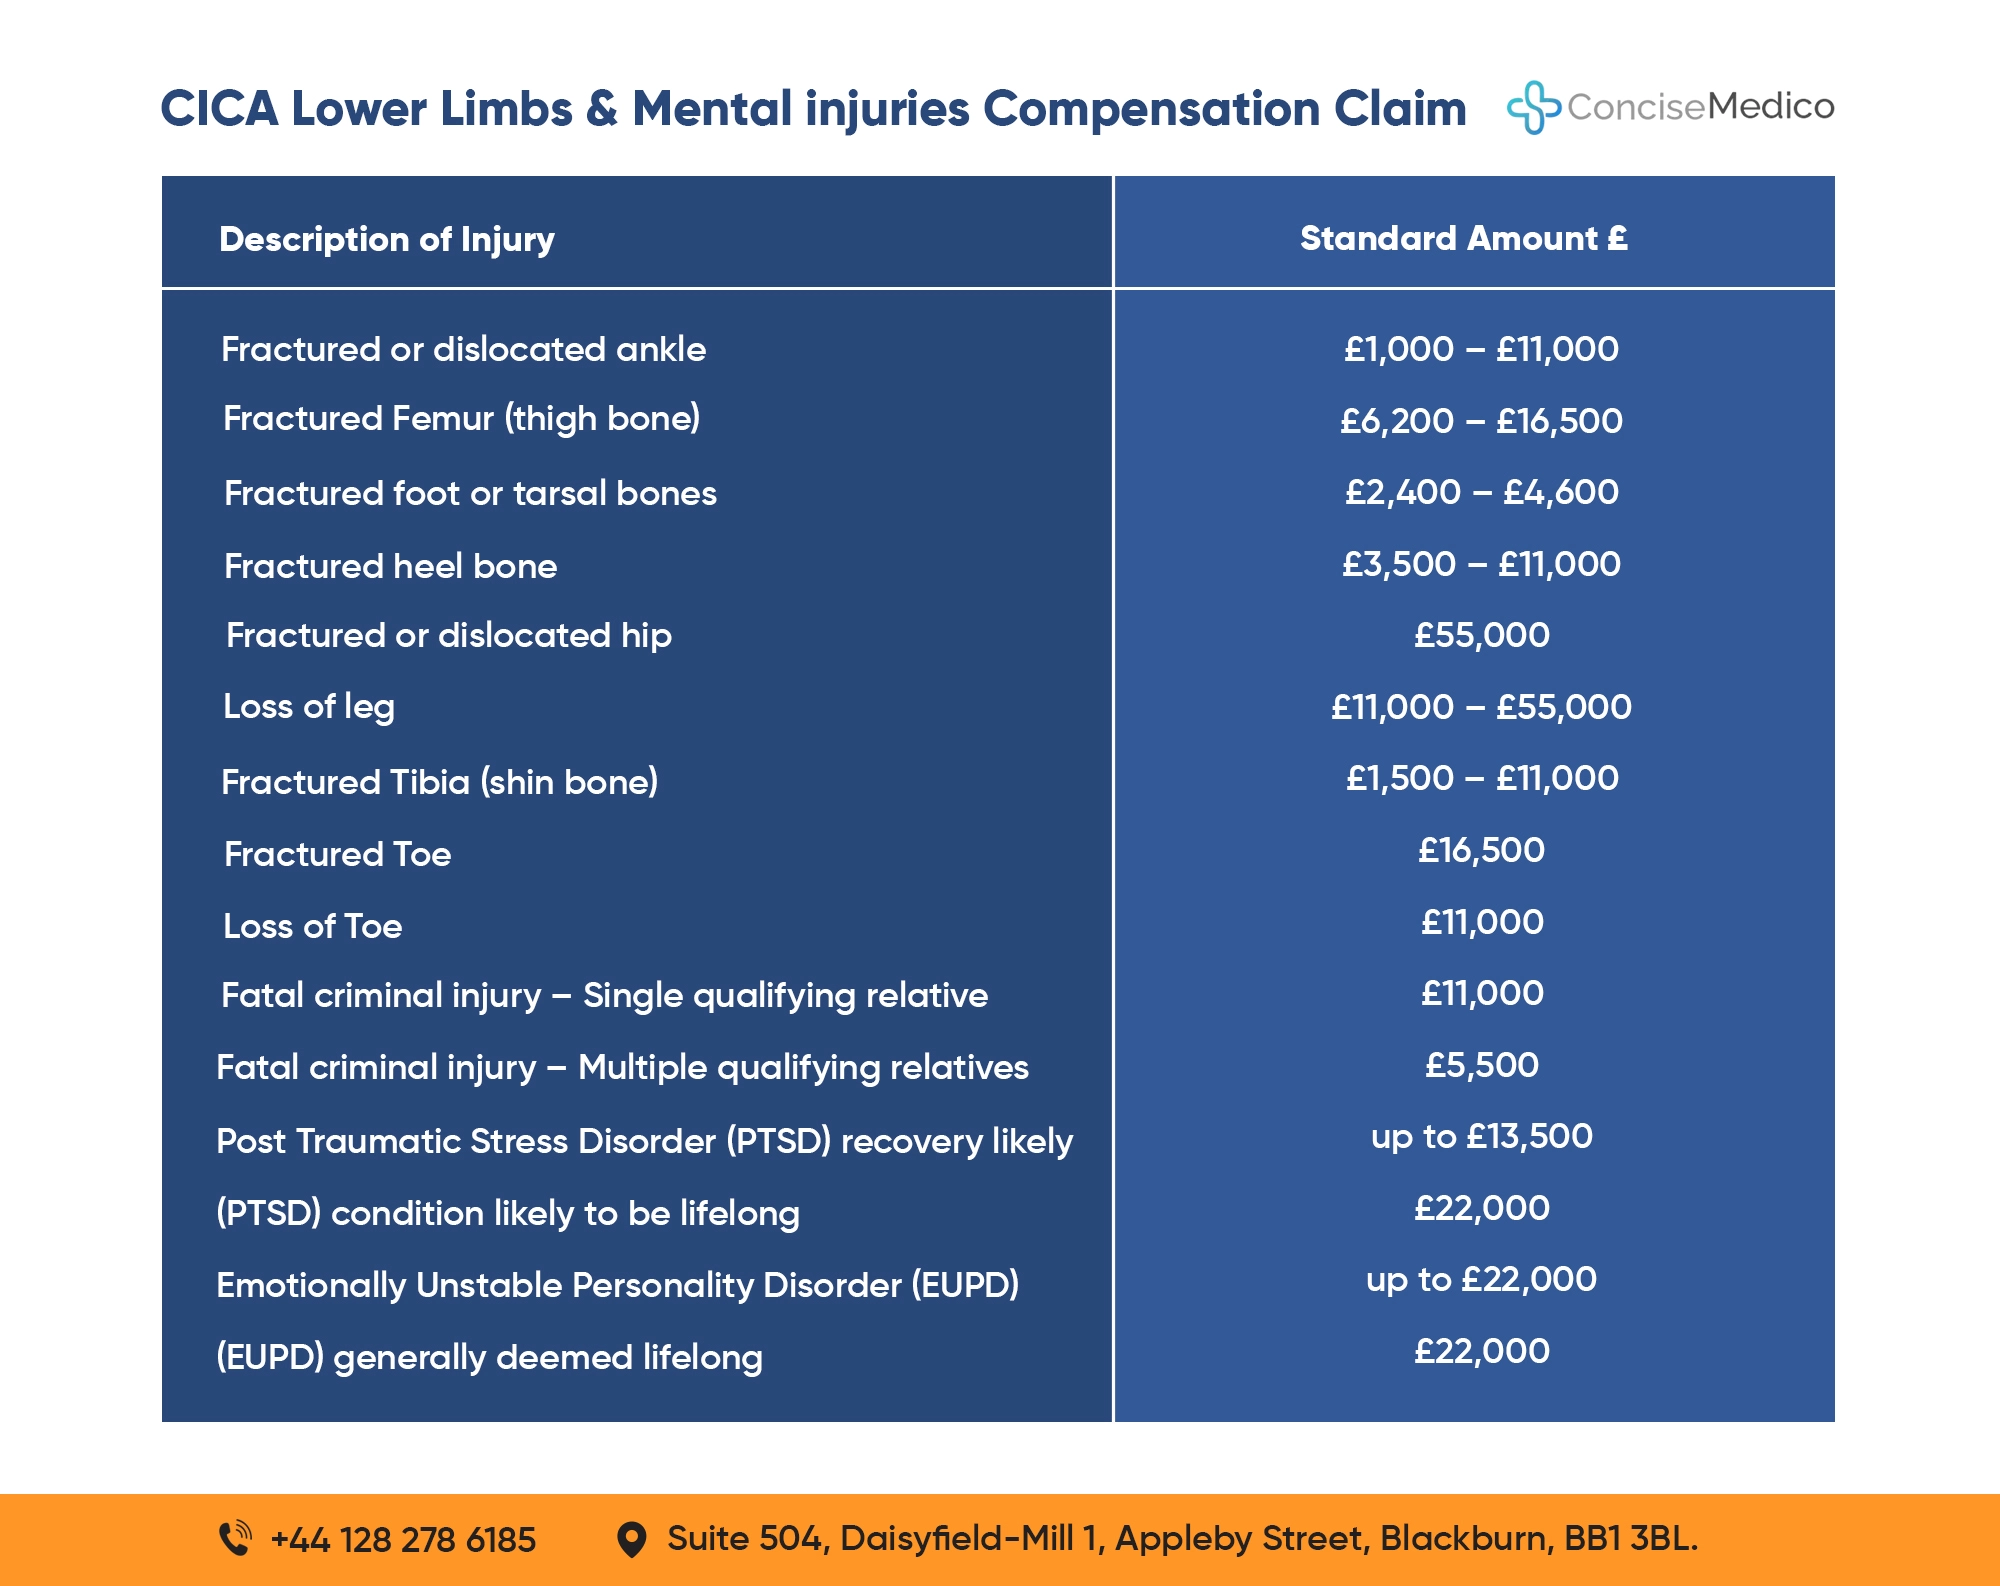 CICA Lower Limbs Injuries Compensation Amount